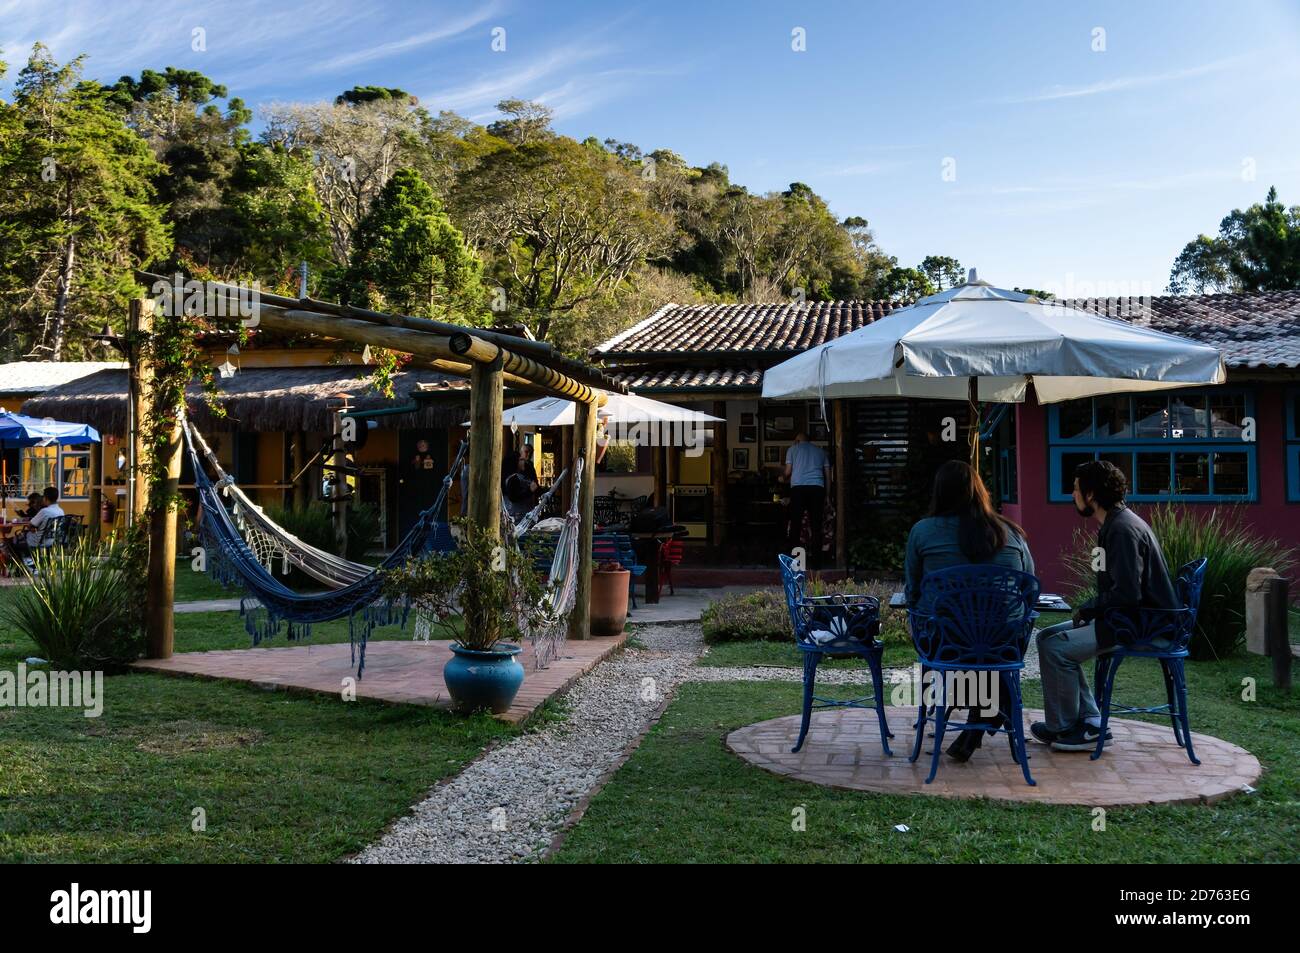 Cozy and beautifully decorated backyard garden of Moara Cafe, where costumers can relax while enjoy some coffee. Cunha, Sao Paulo - Brazil. Stock Photo